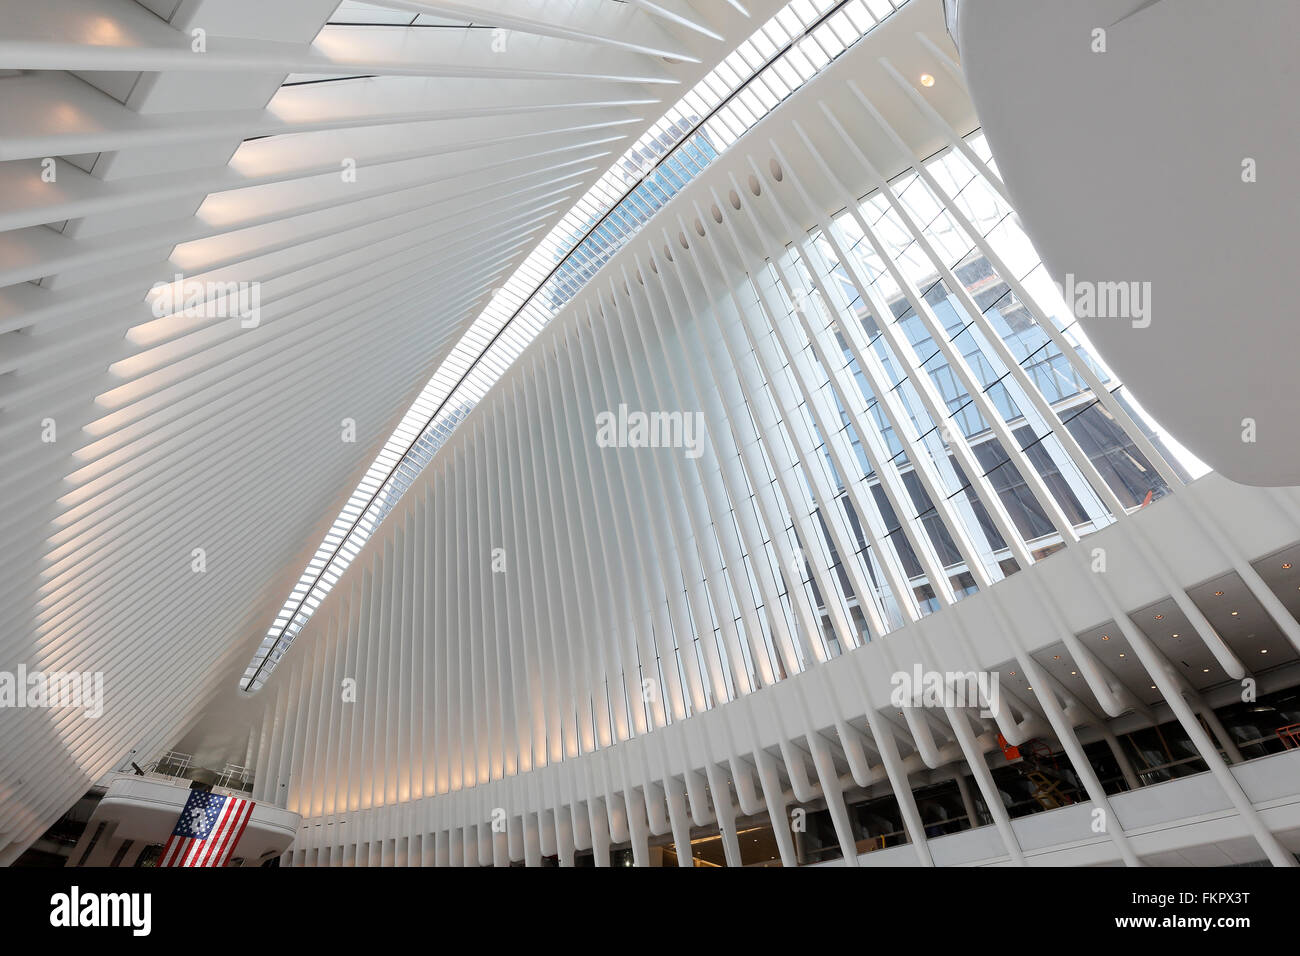 Oculus at the World Trade Center transportation hub in New York City Stock Photo